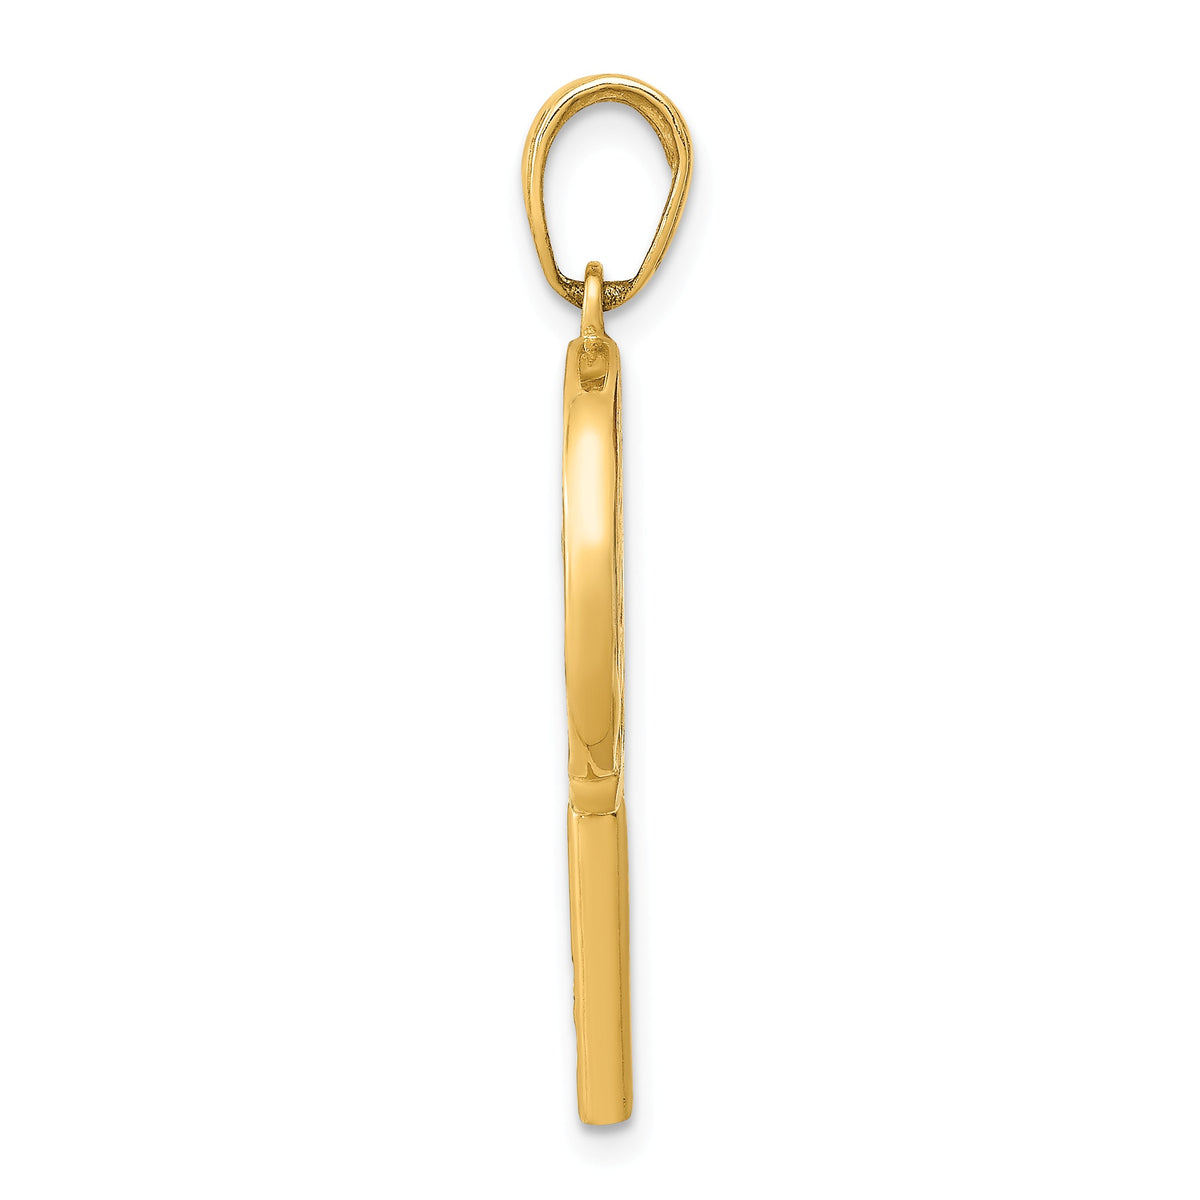 Alternate view of the 14k Yellow Gold and Enamel Lollipop Pendant by The Black Bow Jewelry Co.